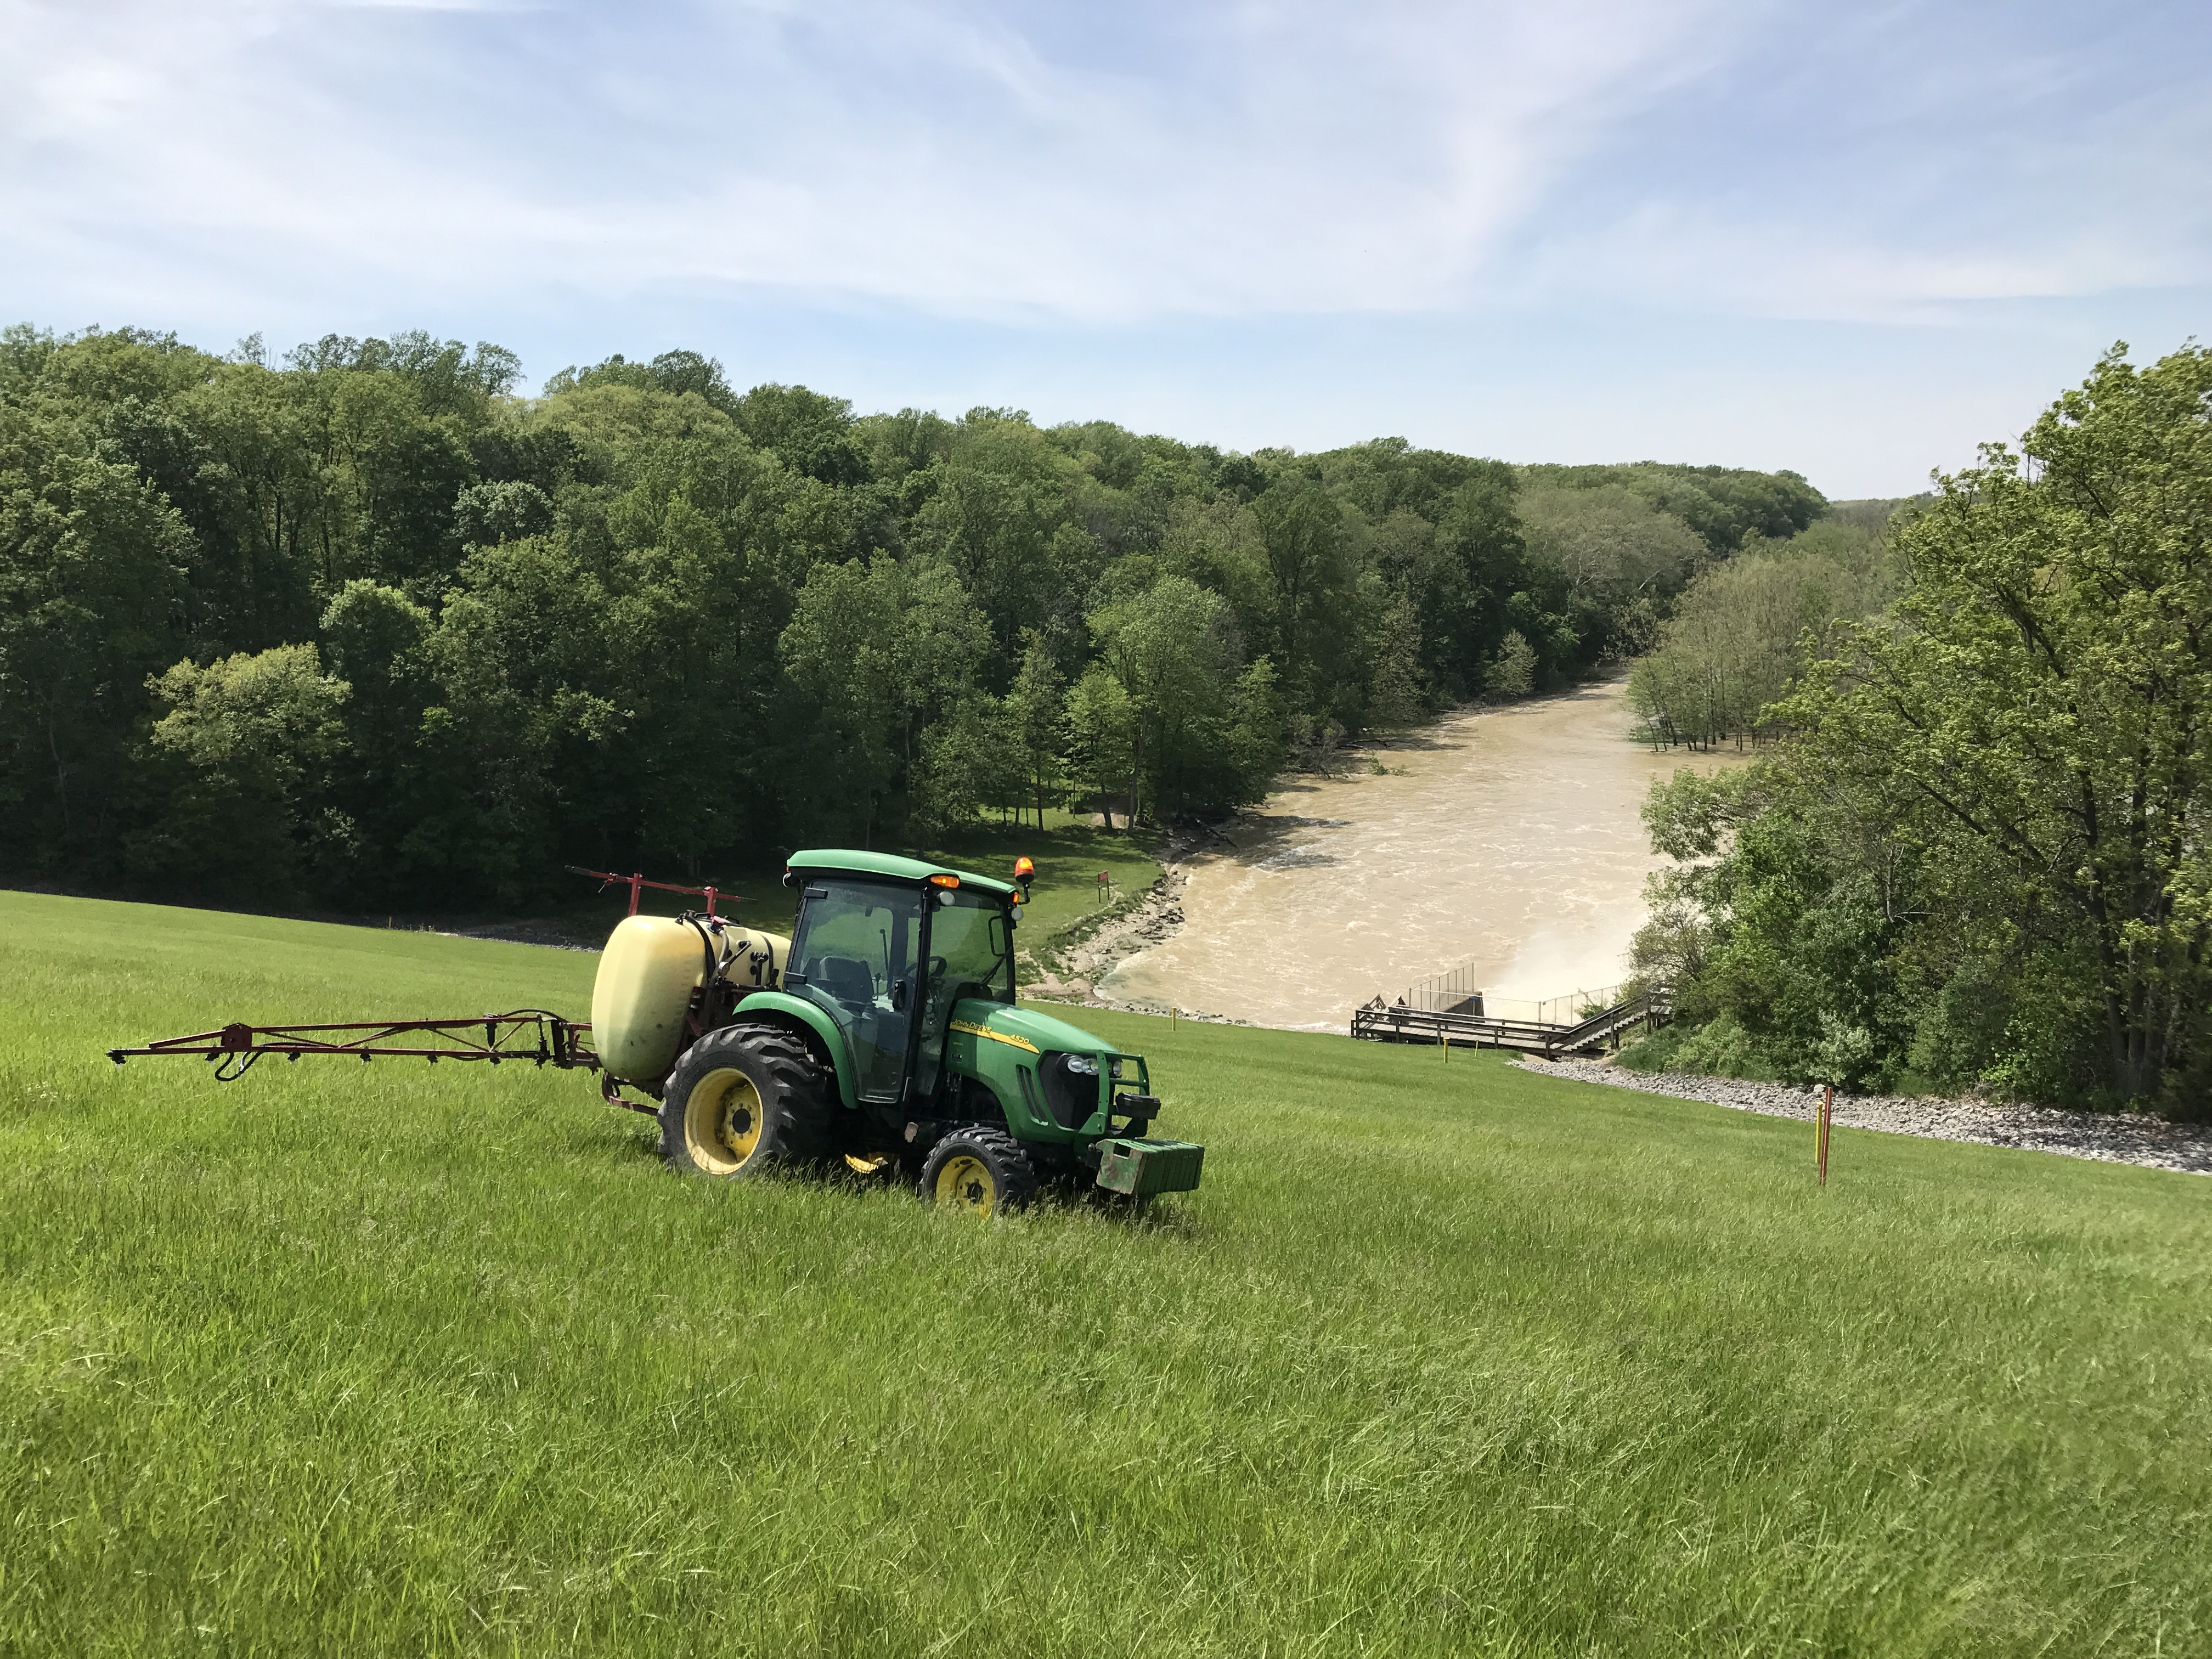 Tractor spraying weed control on hillside